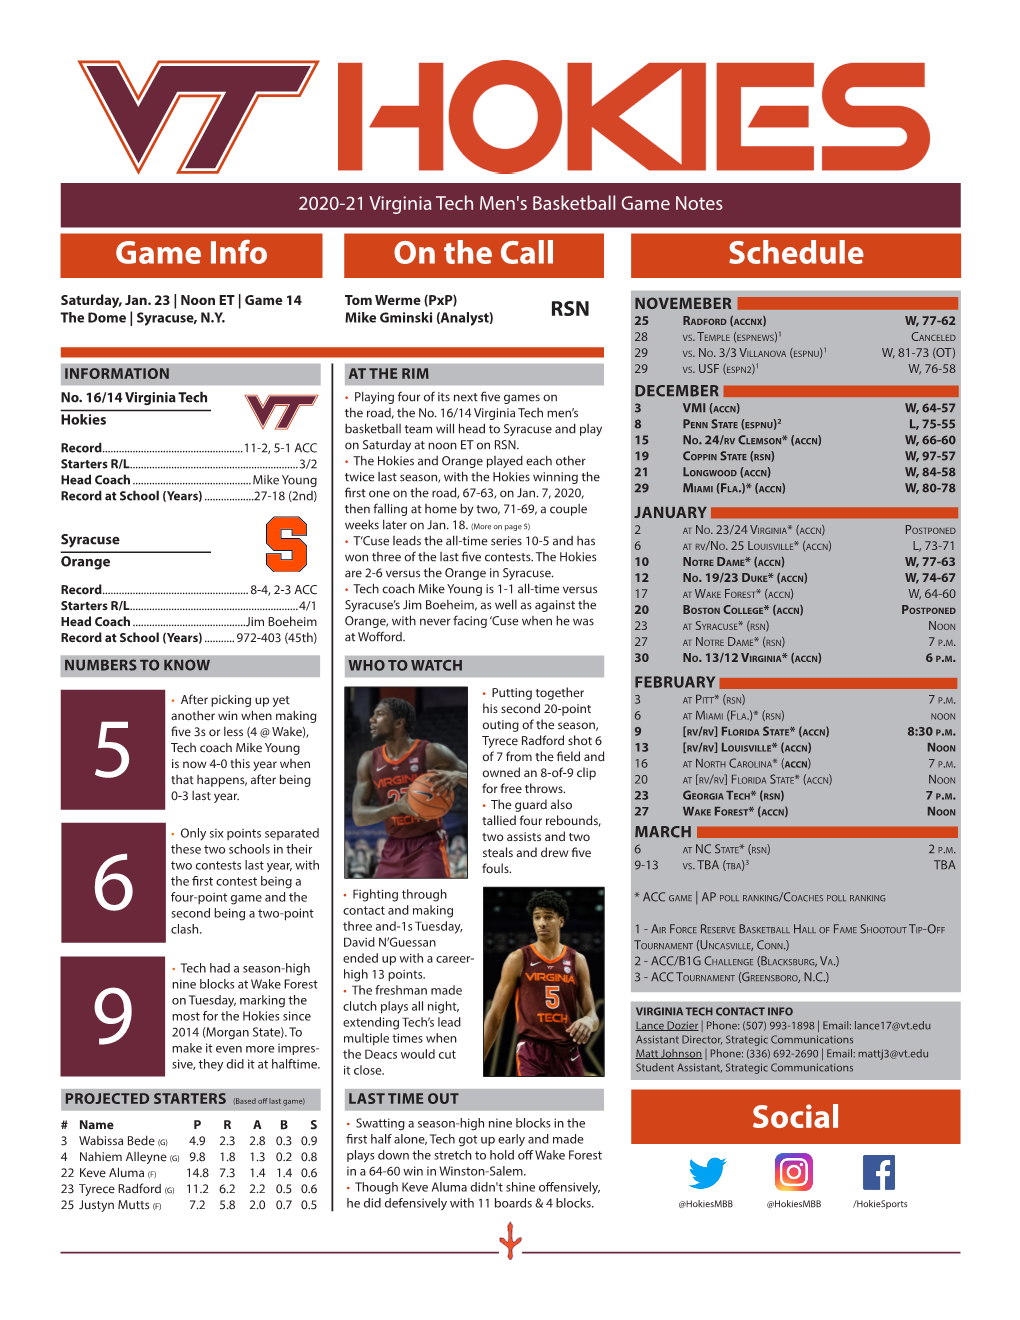 Mike Young Twice Last Season, with the Hokies Winning the 29 Miami (Fla.)* (Accn) W, 80-78 Record at School (Years)